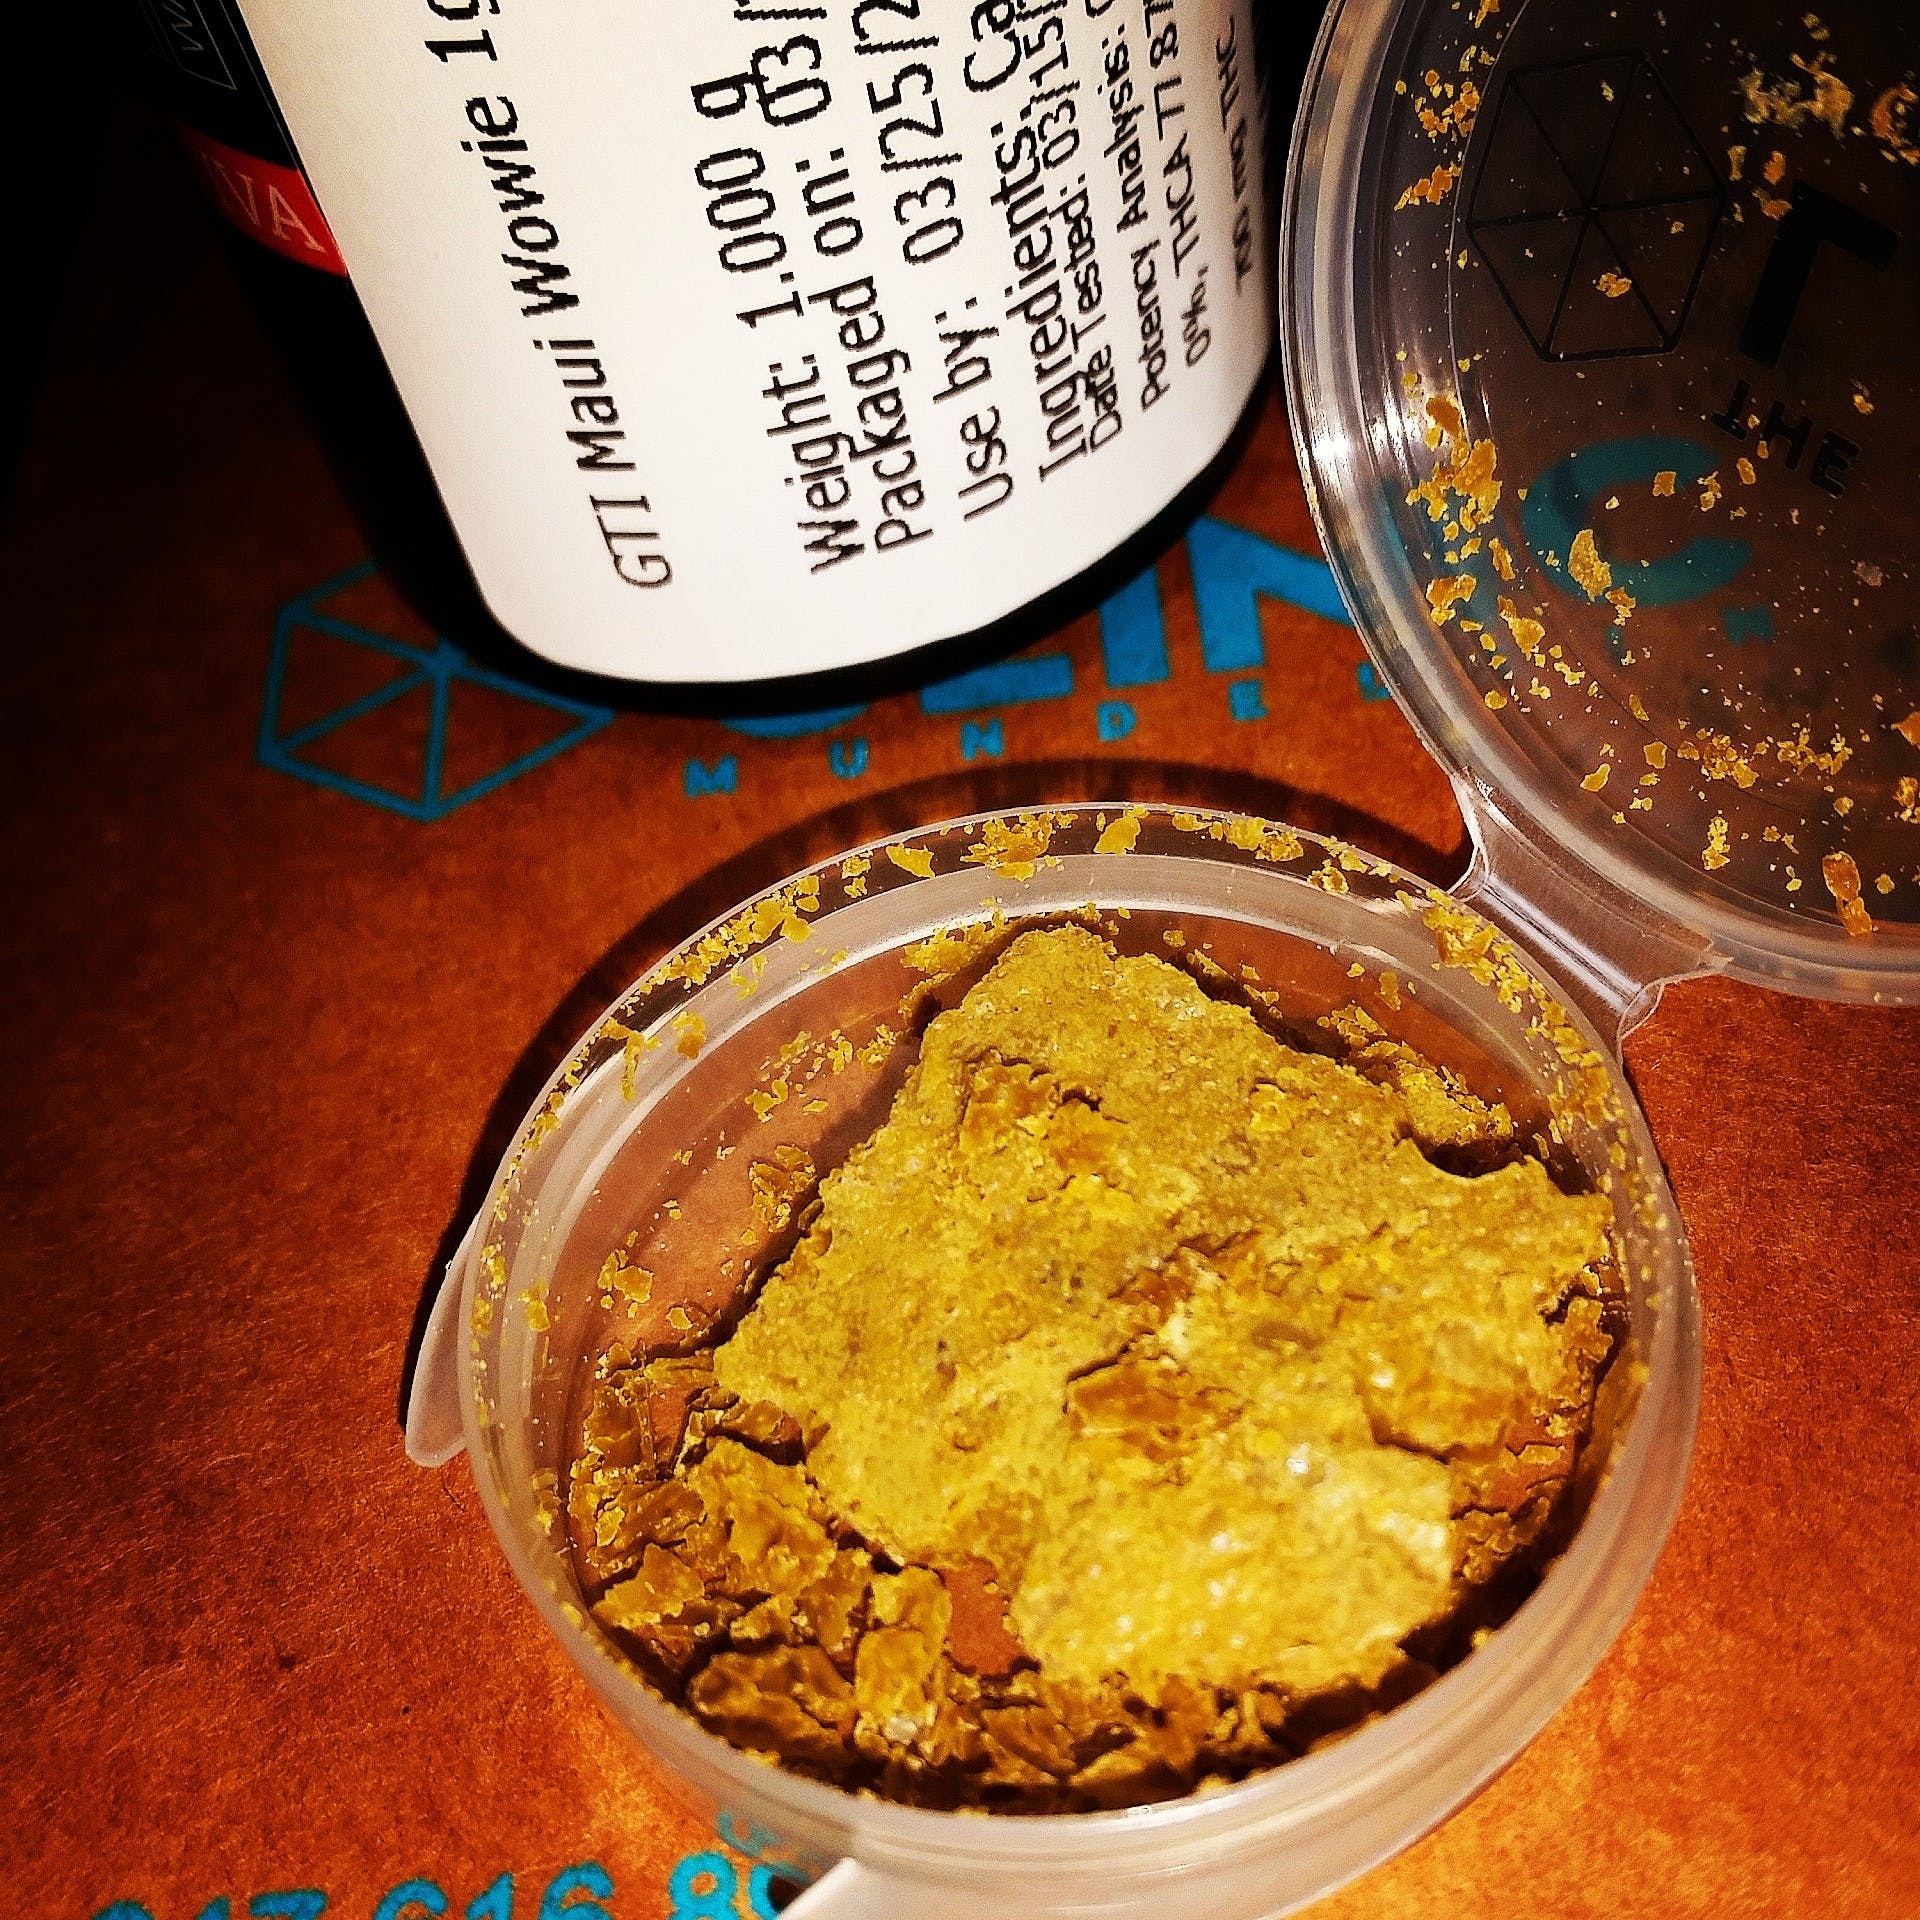 concentrate-maui-wowie-concentrate